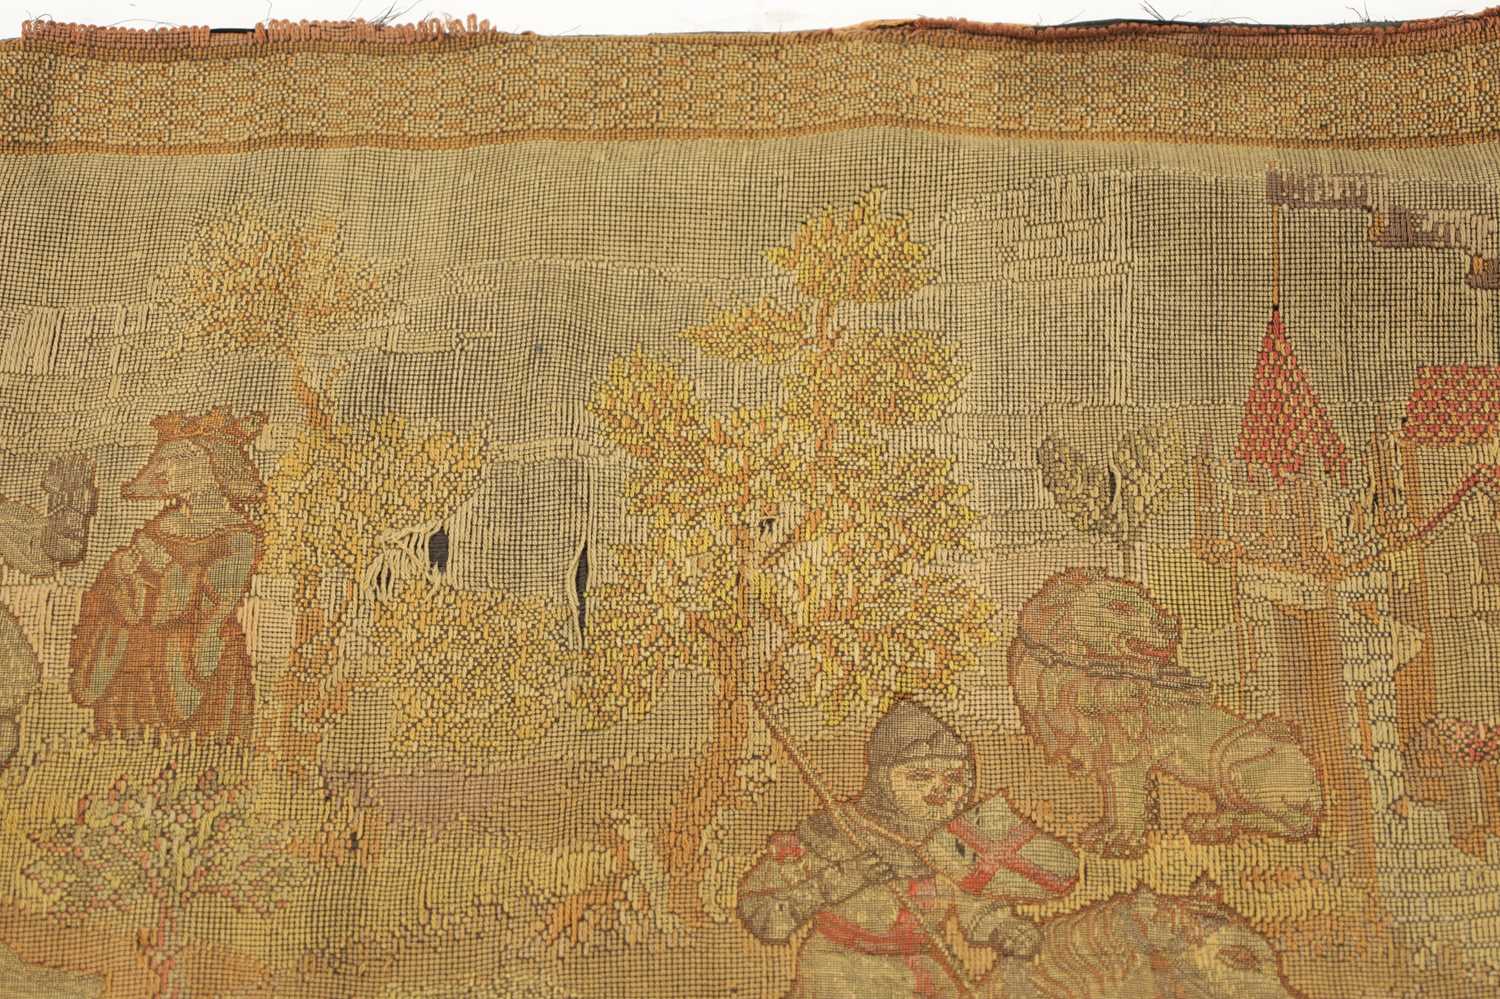 AN 18TH CENTURY WALL HANGING TAPESTRY - Image 3 of 7